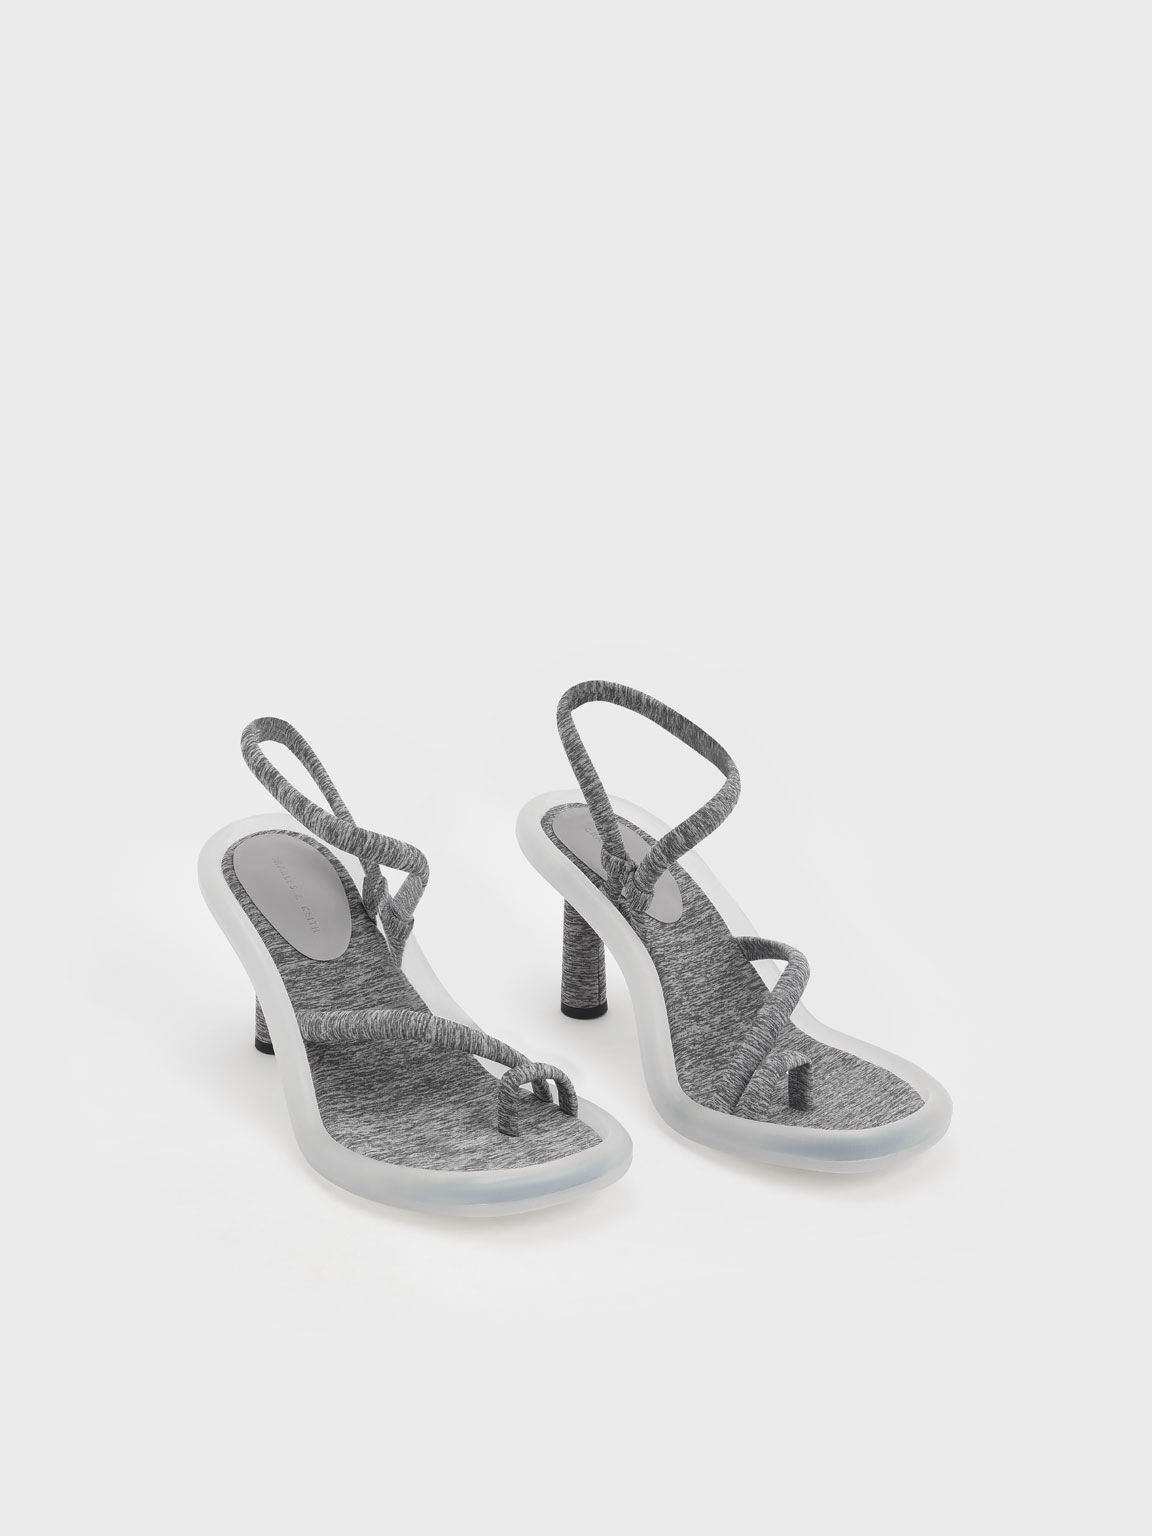 Electra Recycled Polyester Toe-Loop Heeled Sandals, Light Grey, hi-res